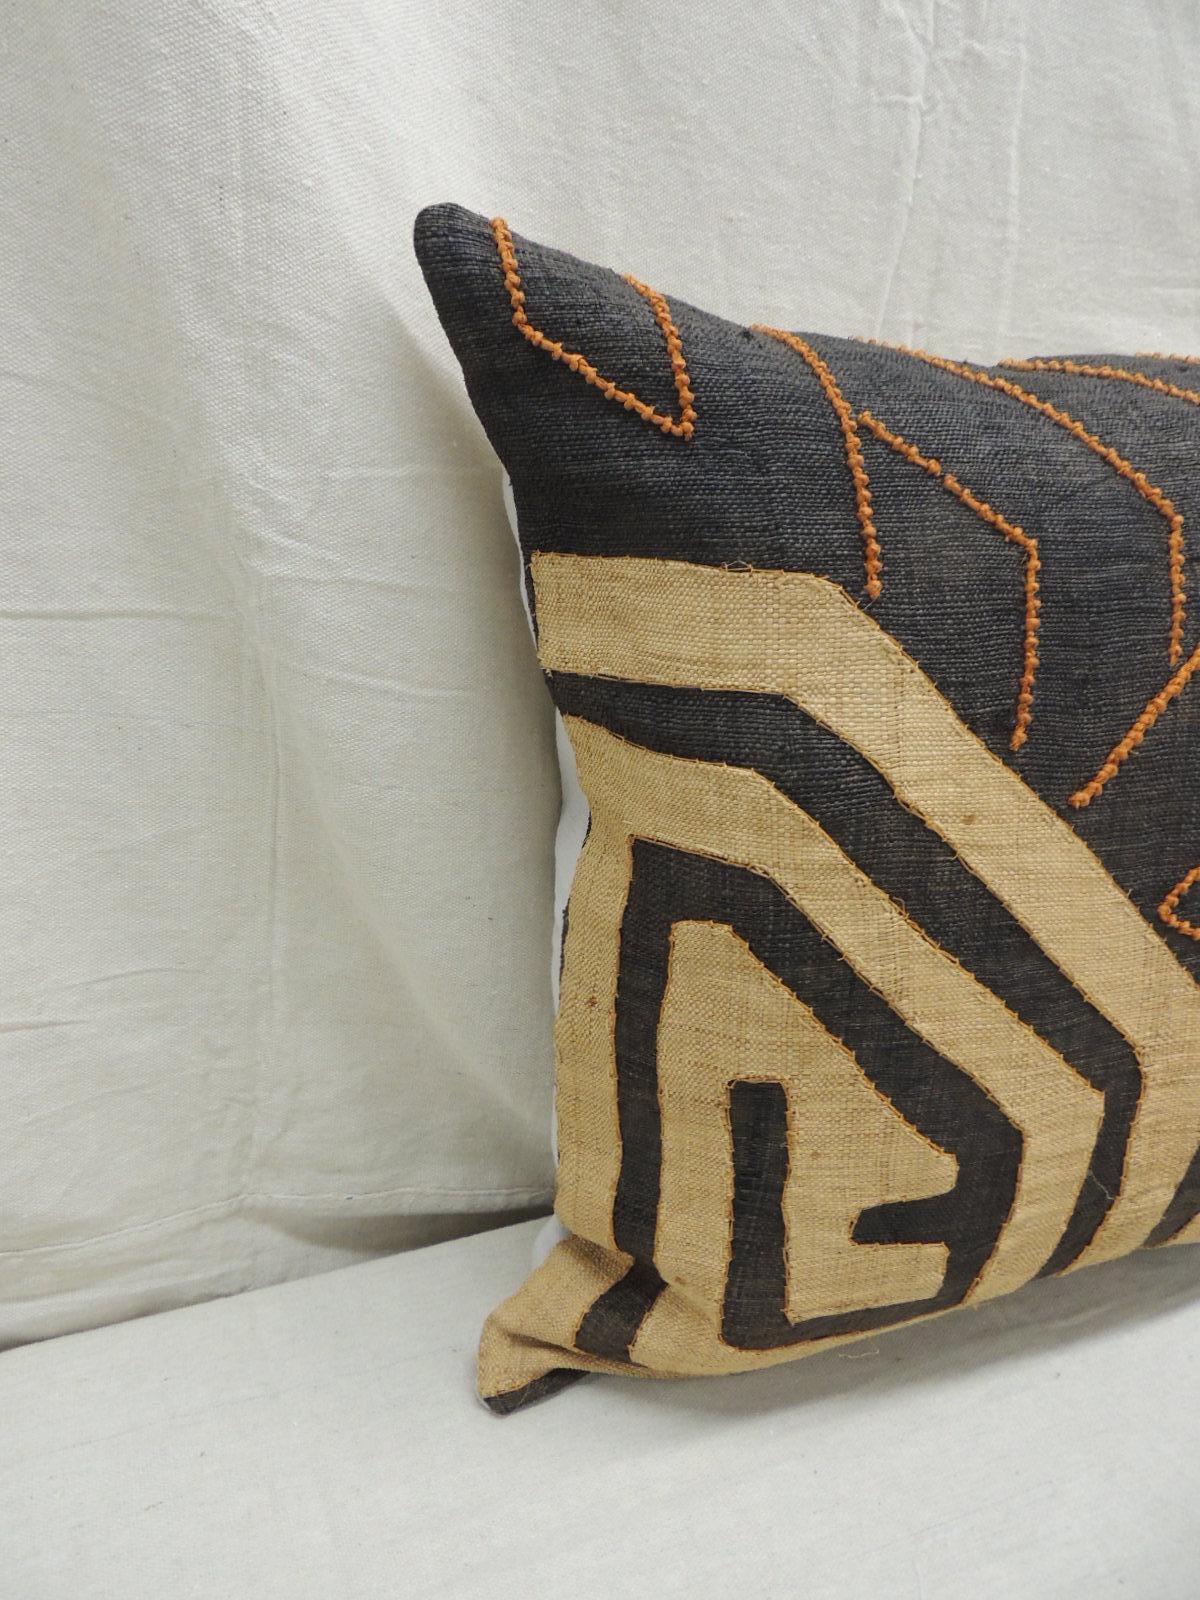 Vintage Kuba orange and black handwoven patchwork African decorative pillow.
Handwoven patchwork and appliqué raffia African decorative lumbar pillow with labyrinth pattern and orange beads woven on the textile.
Light gris color cotton